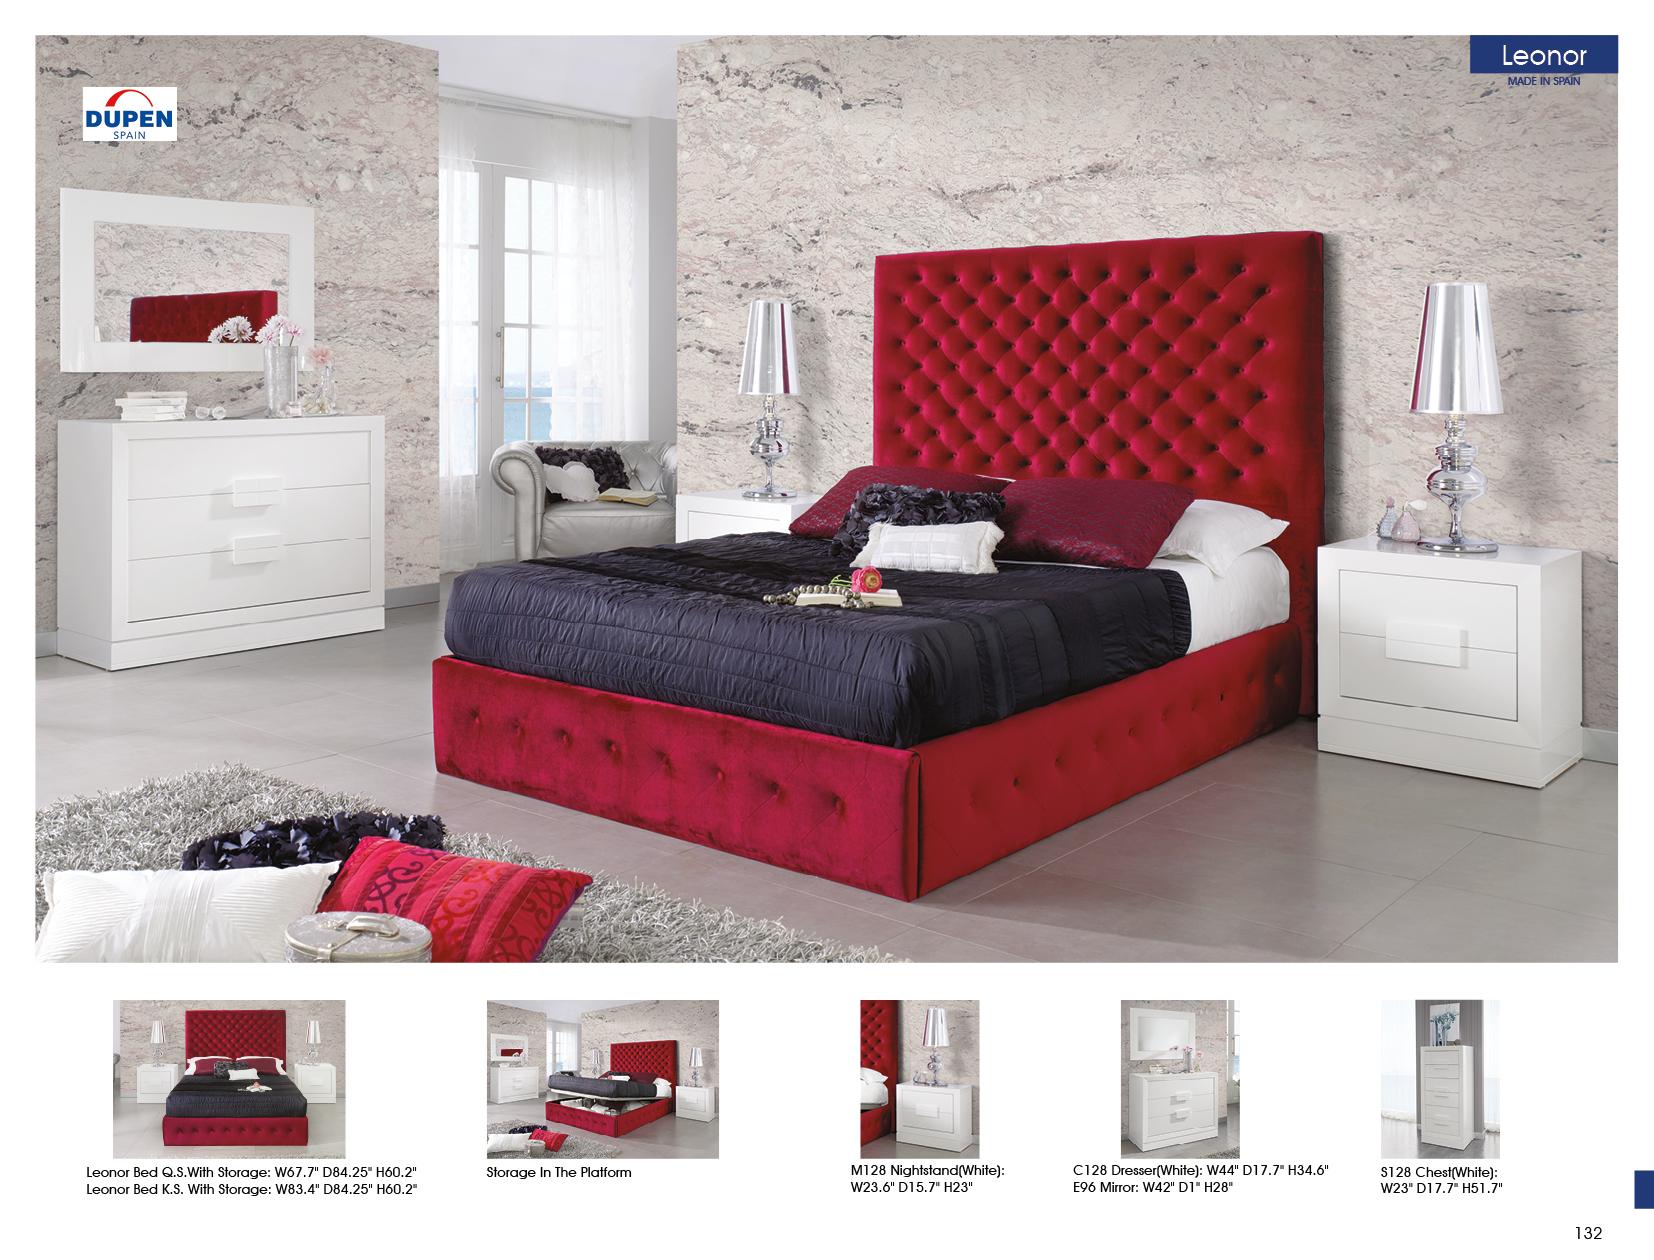 

    
Queen Storage Bedroom Set 5 Leonor Burgundy Contemporary Made in Spain ESF Dupen
